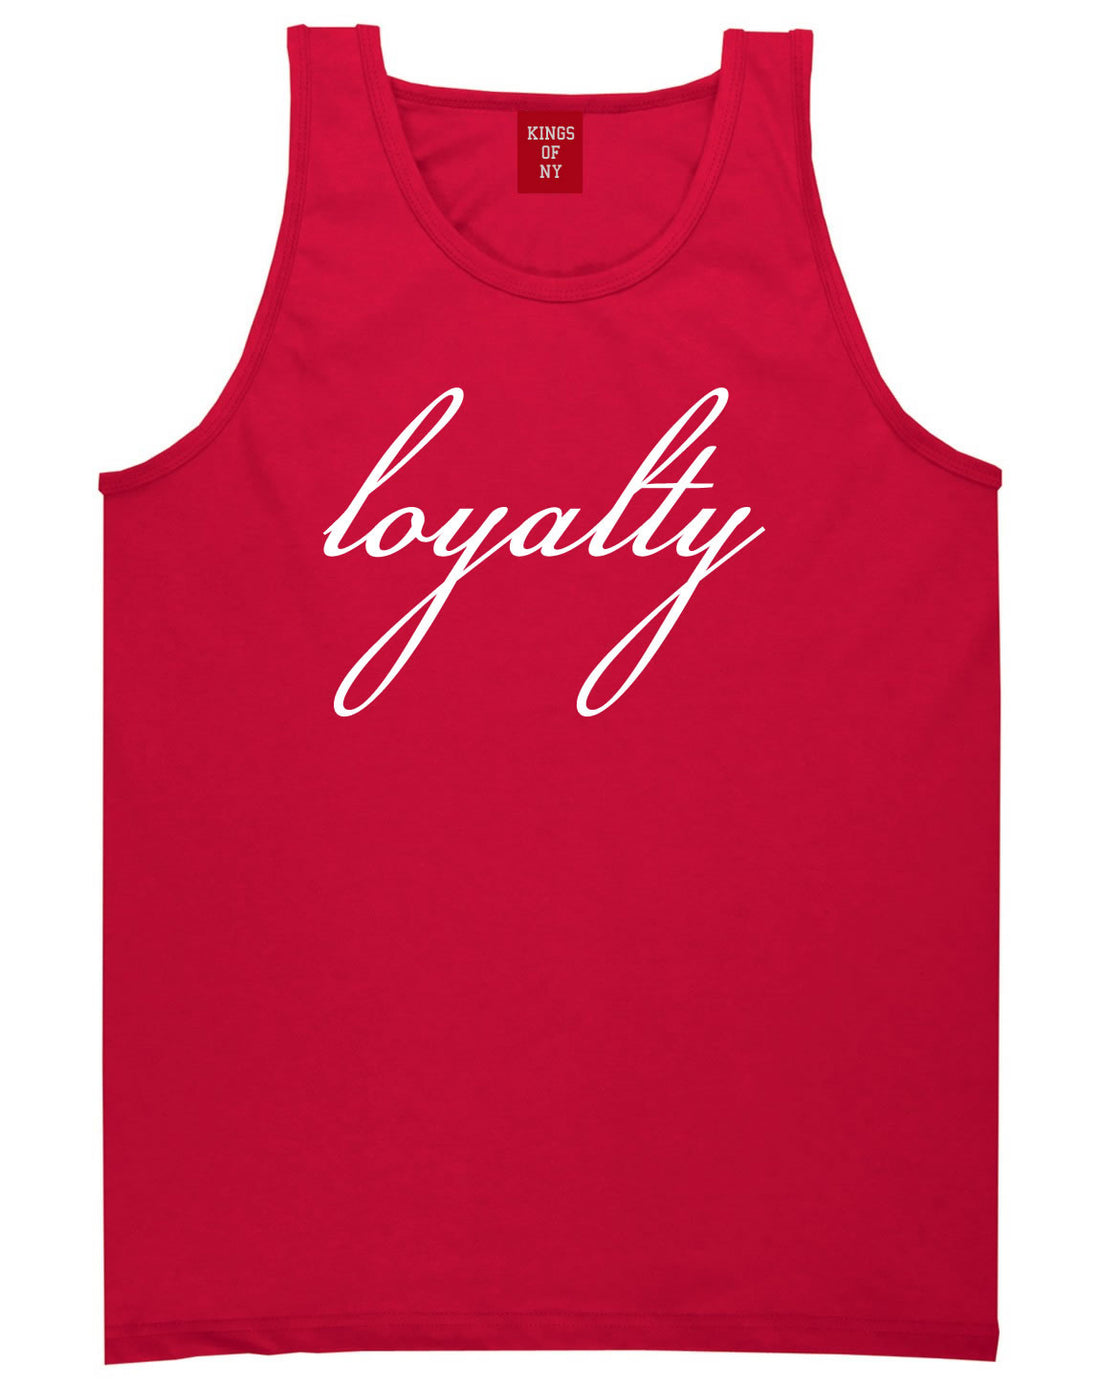 Loyalty Respect Aint New York Hoes Tank Top In Red by Kings Of NY